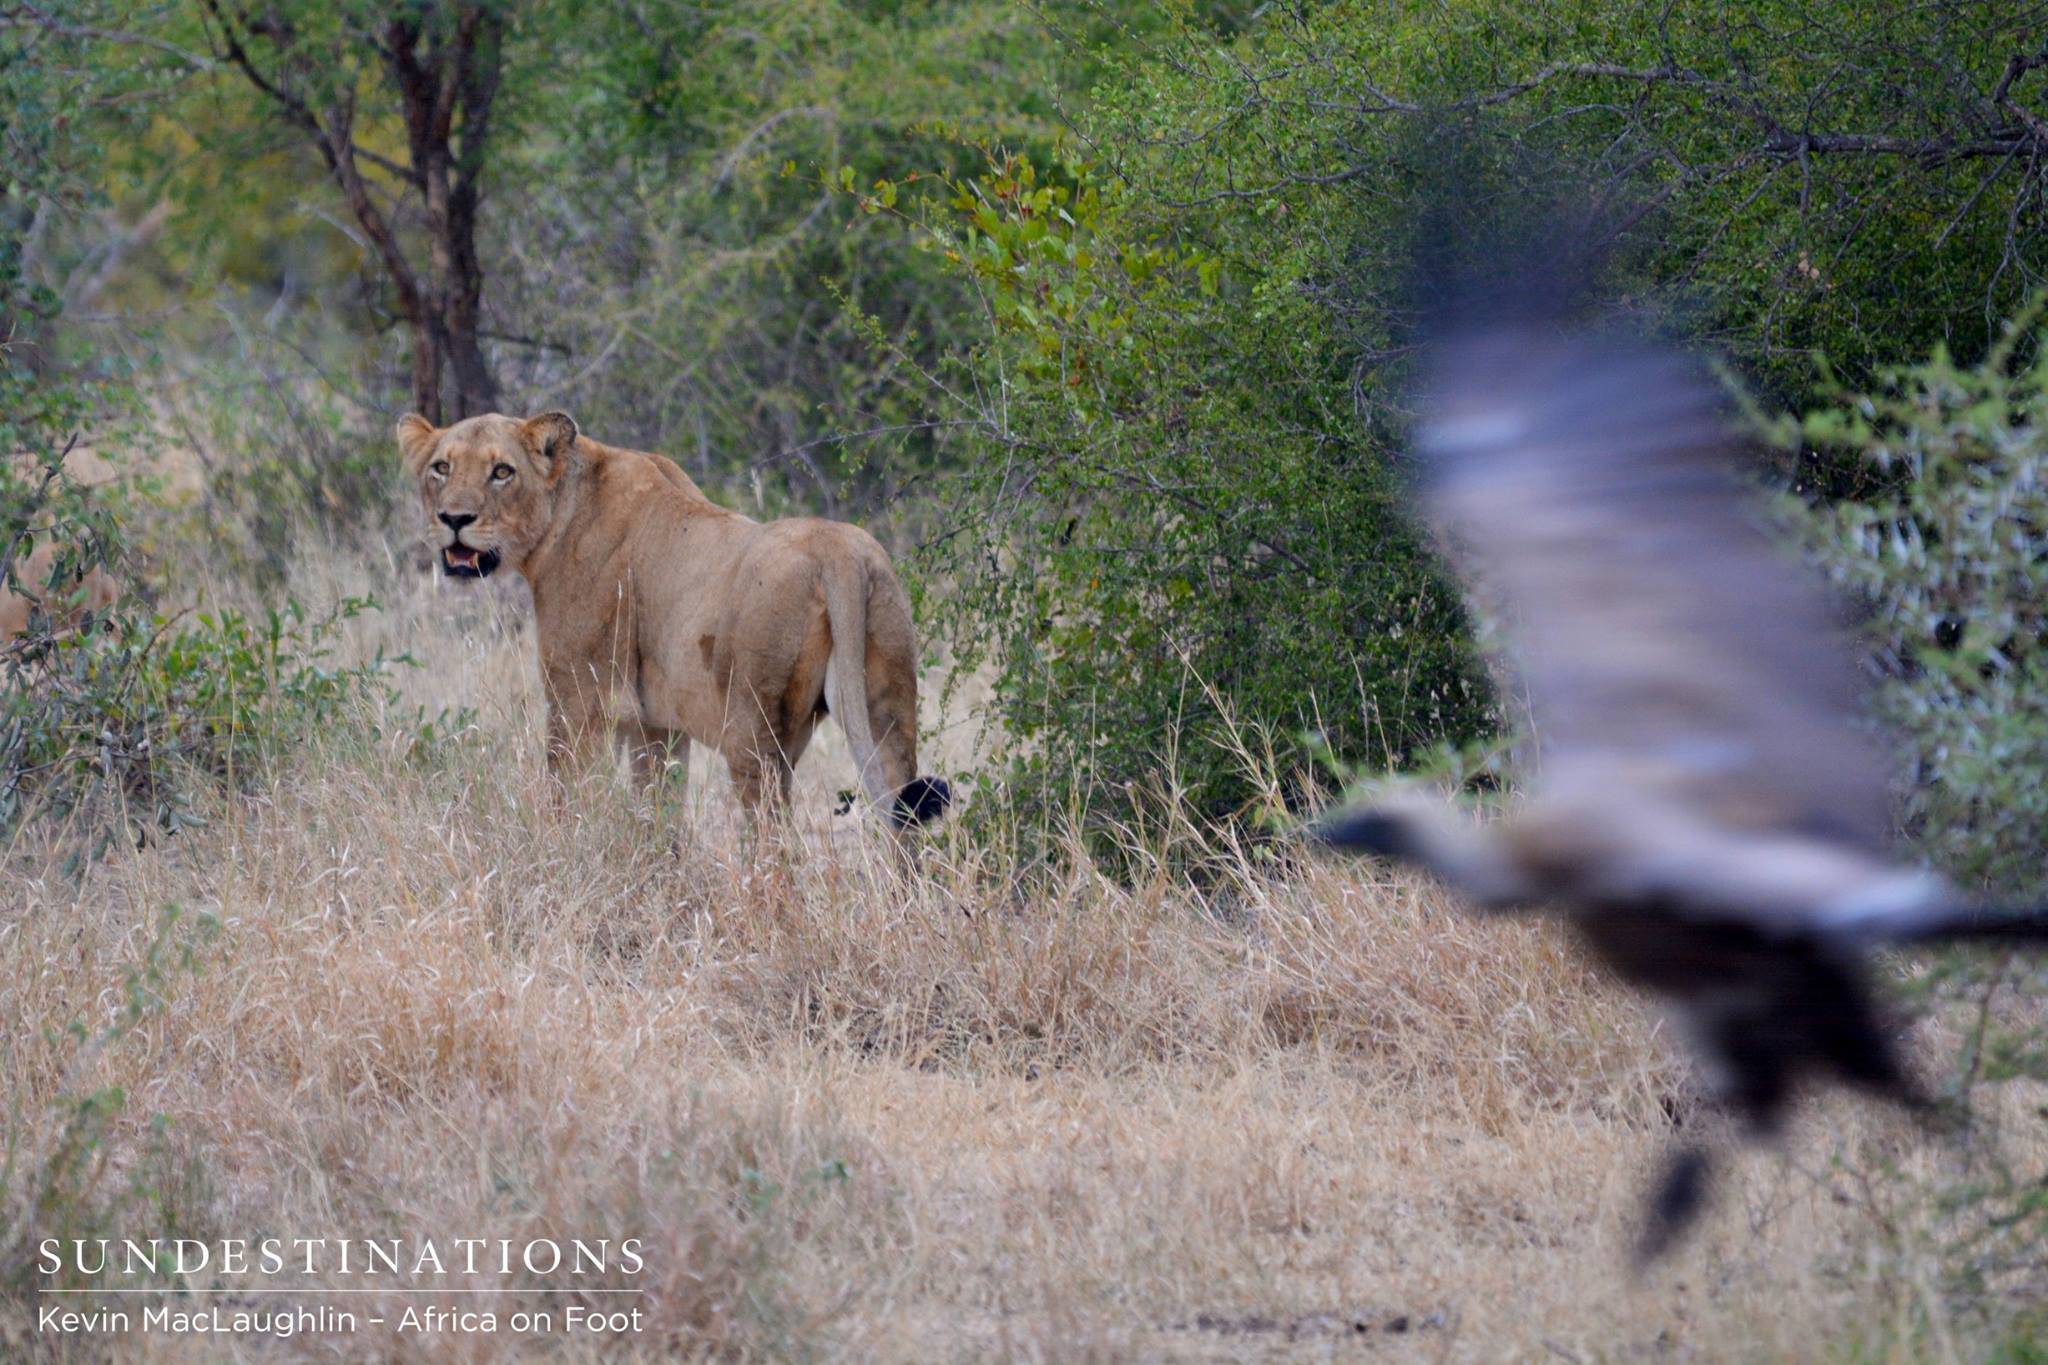 The lioness temporarily abandons her kudu kill